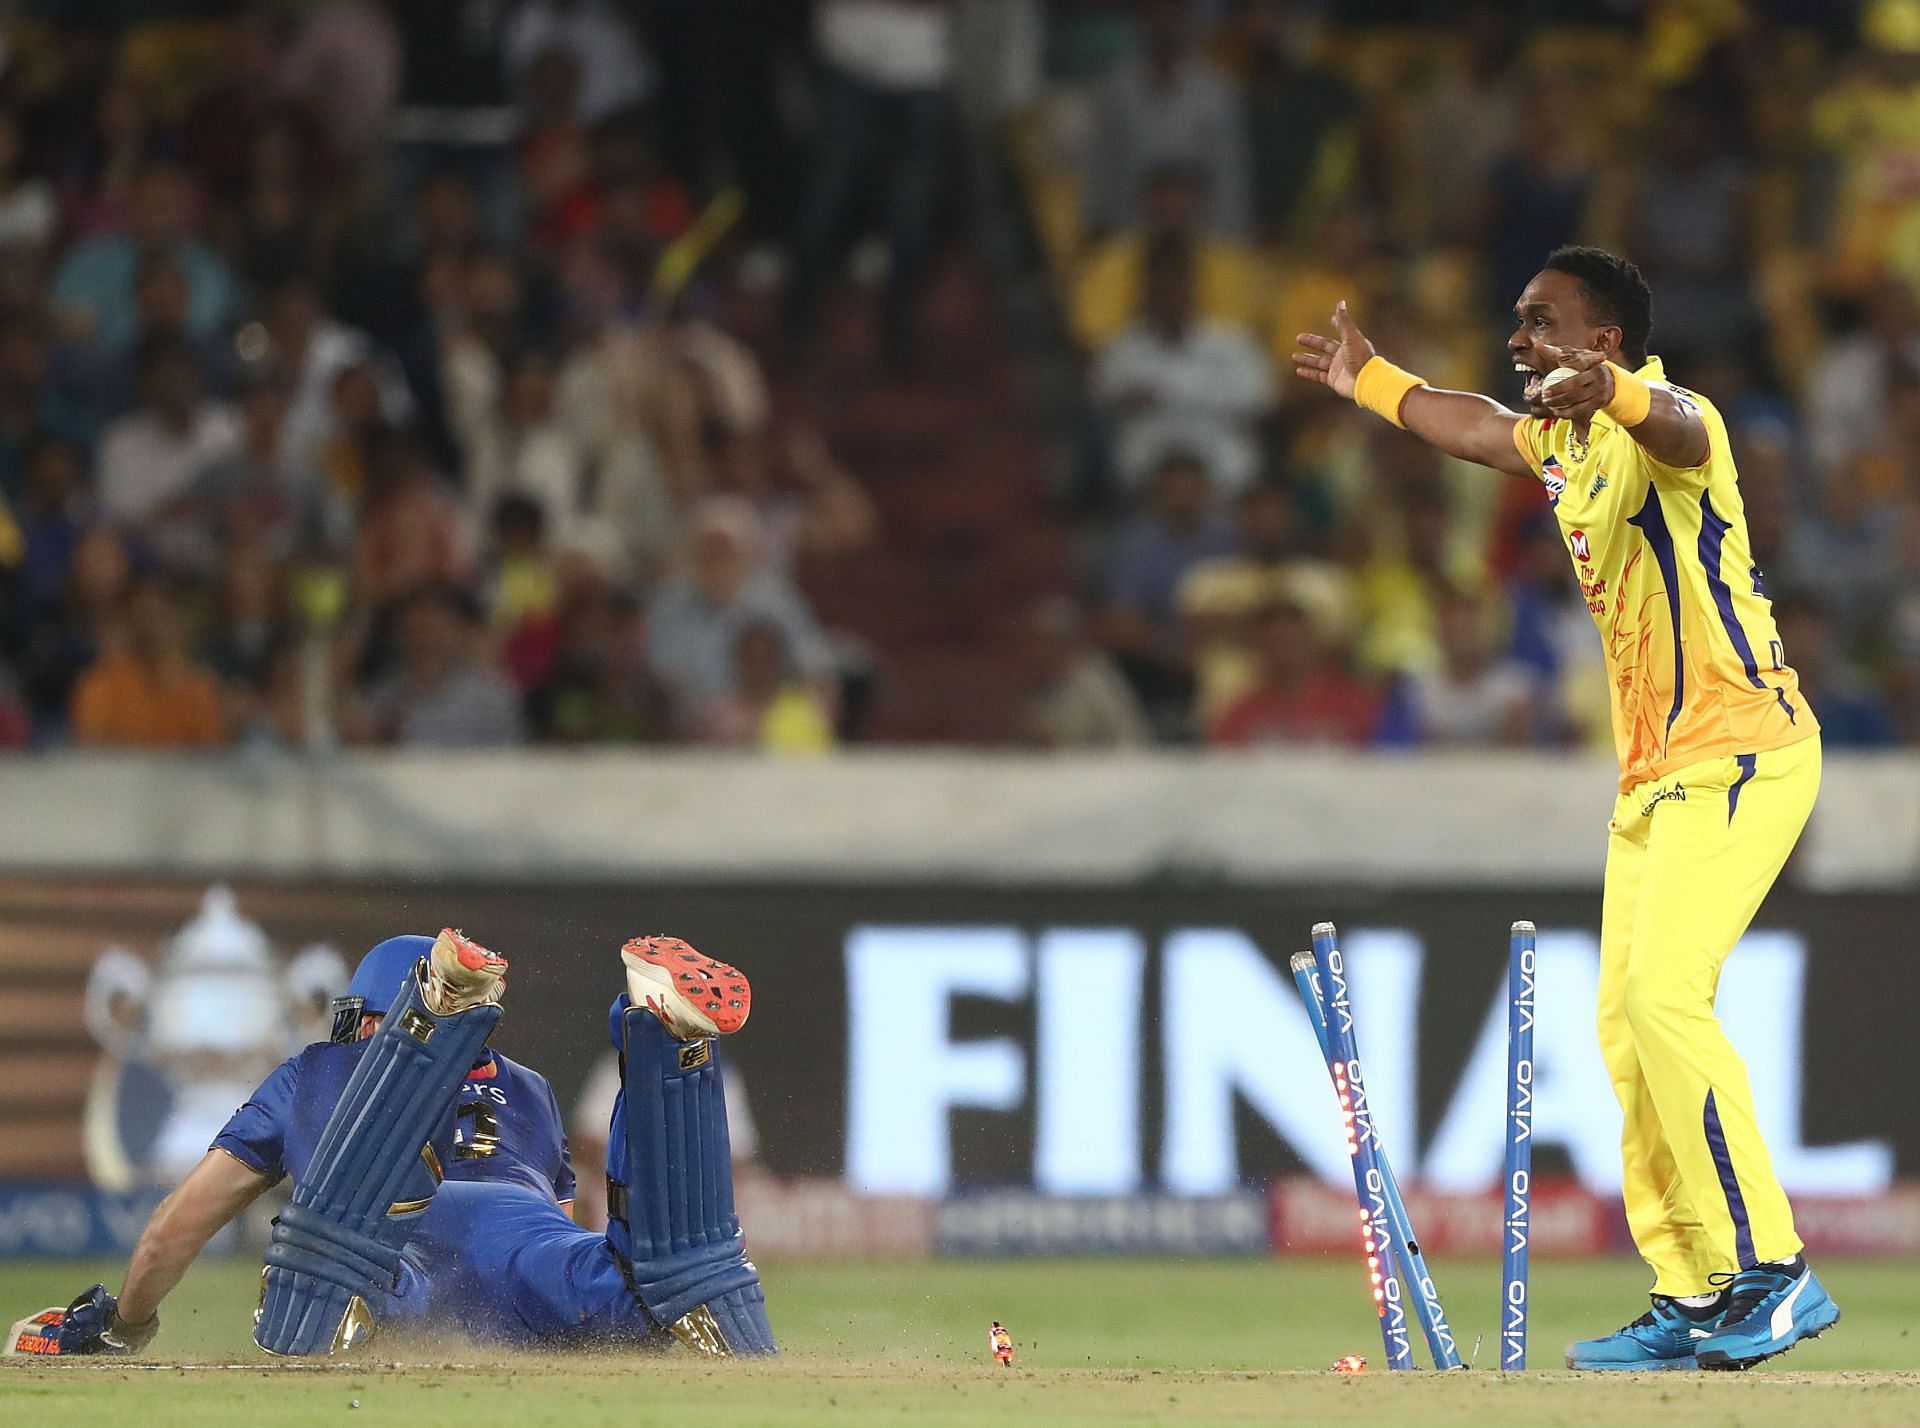 Dwayne Bravo has picked up the most wickets in the history of IPL cricket